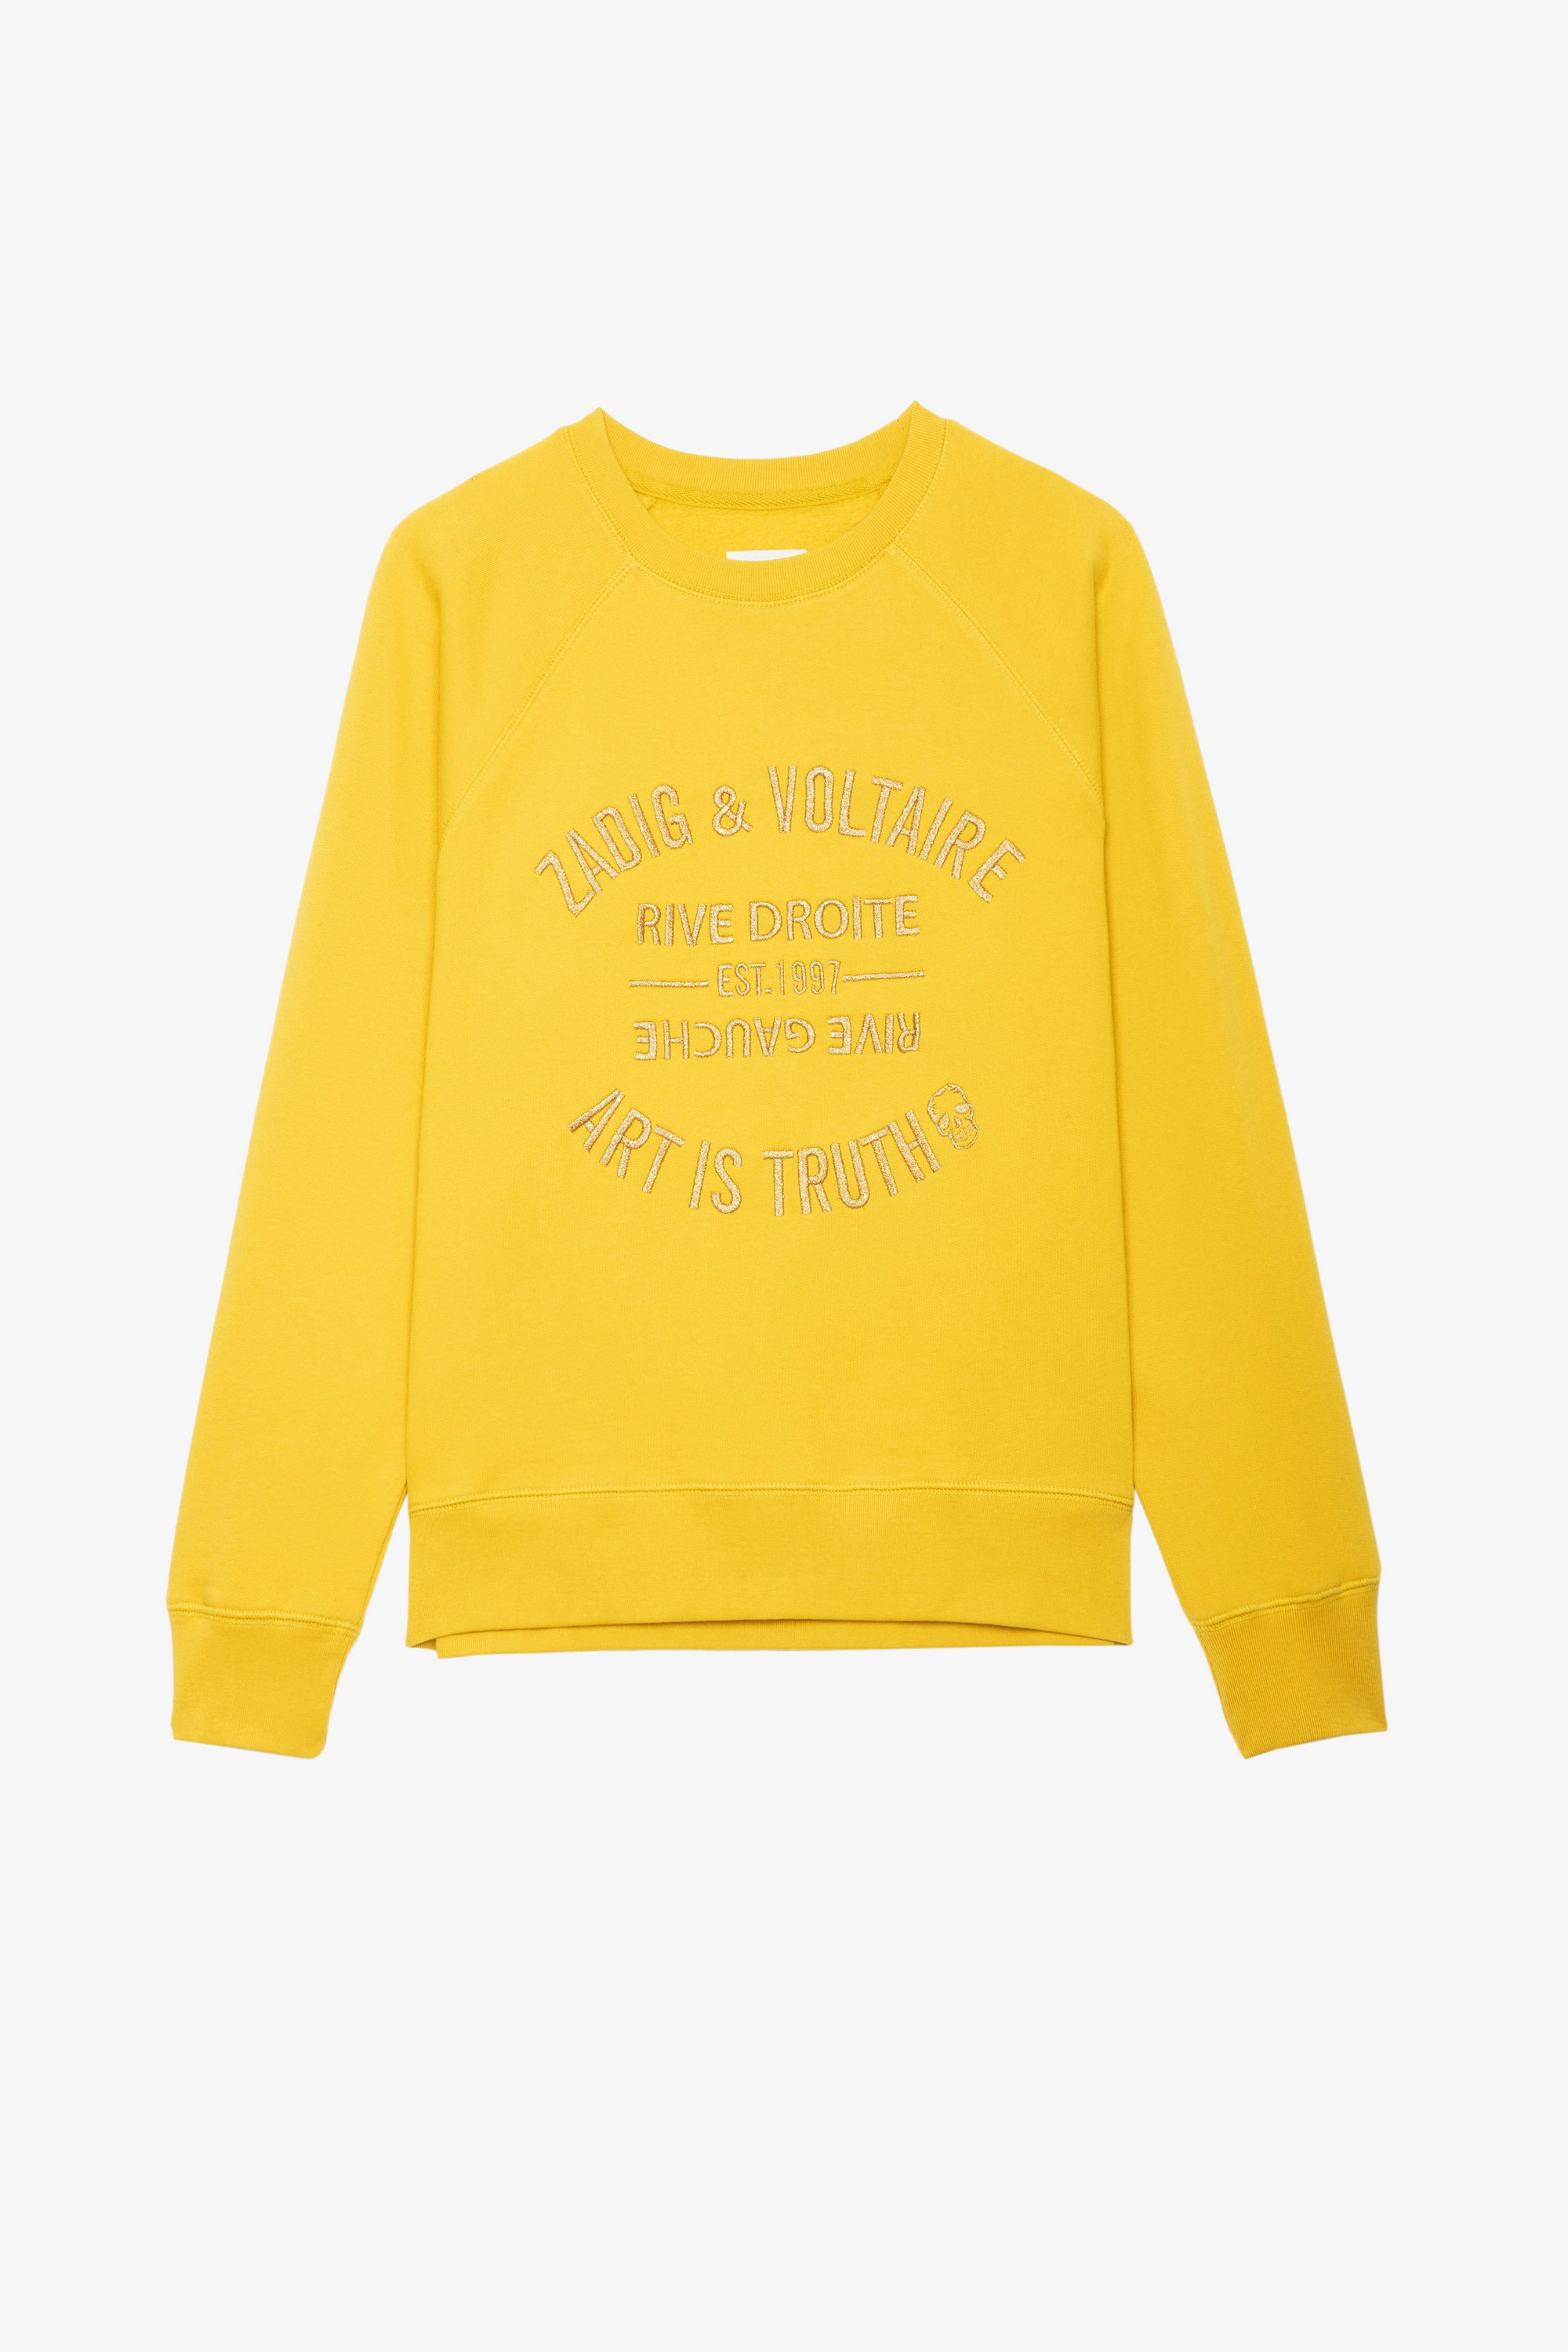 Upper Blason Embroidered Top Women’s yellow cotton sweatshirt with badge embroidery